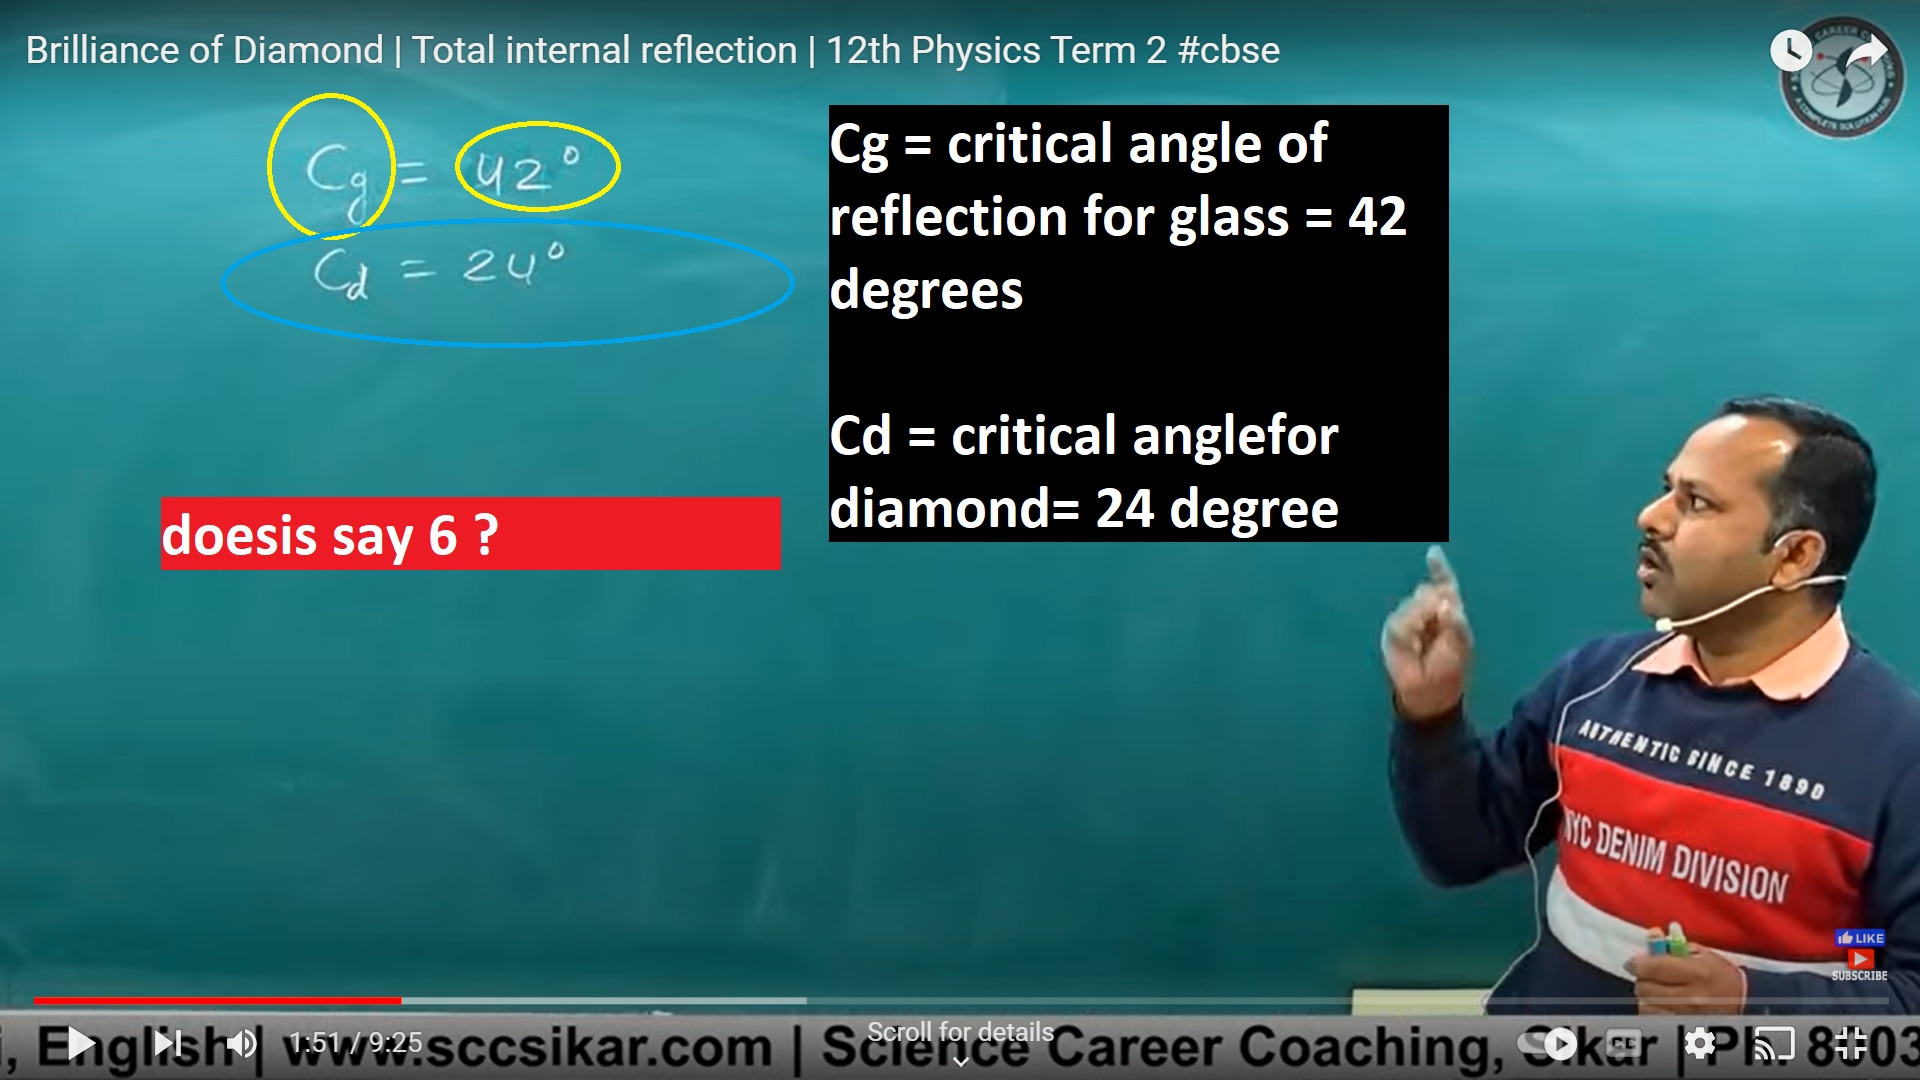 glasscritical angle =42 dgree diamodn crtical agle = 24 deree - refactive idnex of index - = 2.4 and the law is caled snlel law i think and iscaled total internal rflection in dia